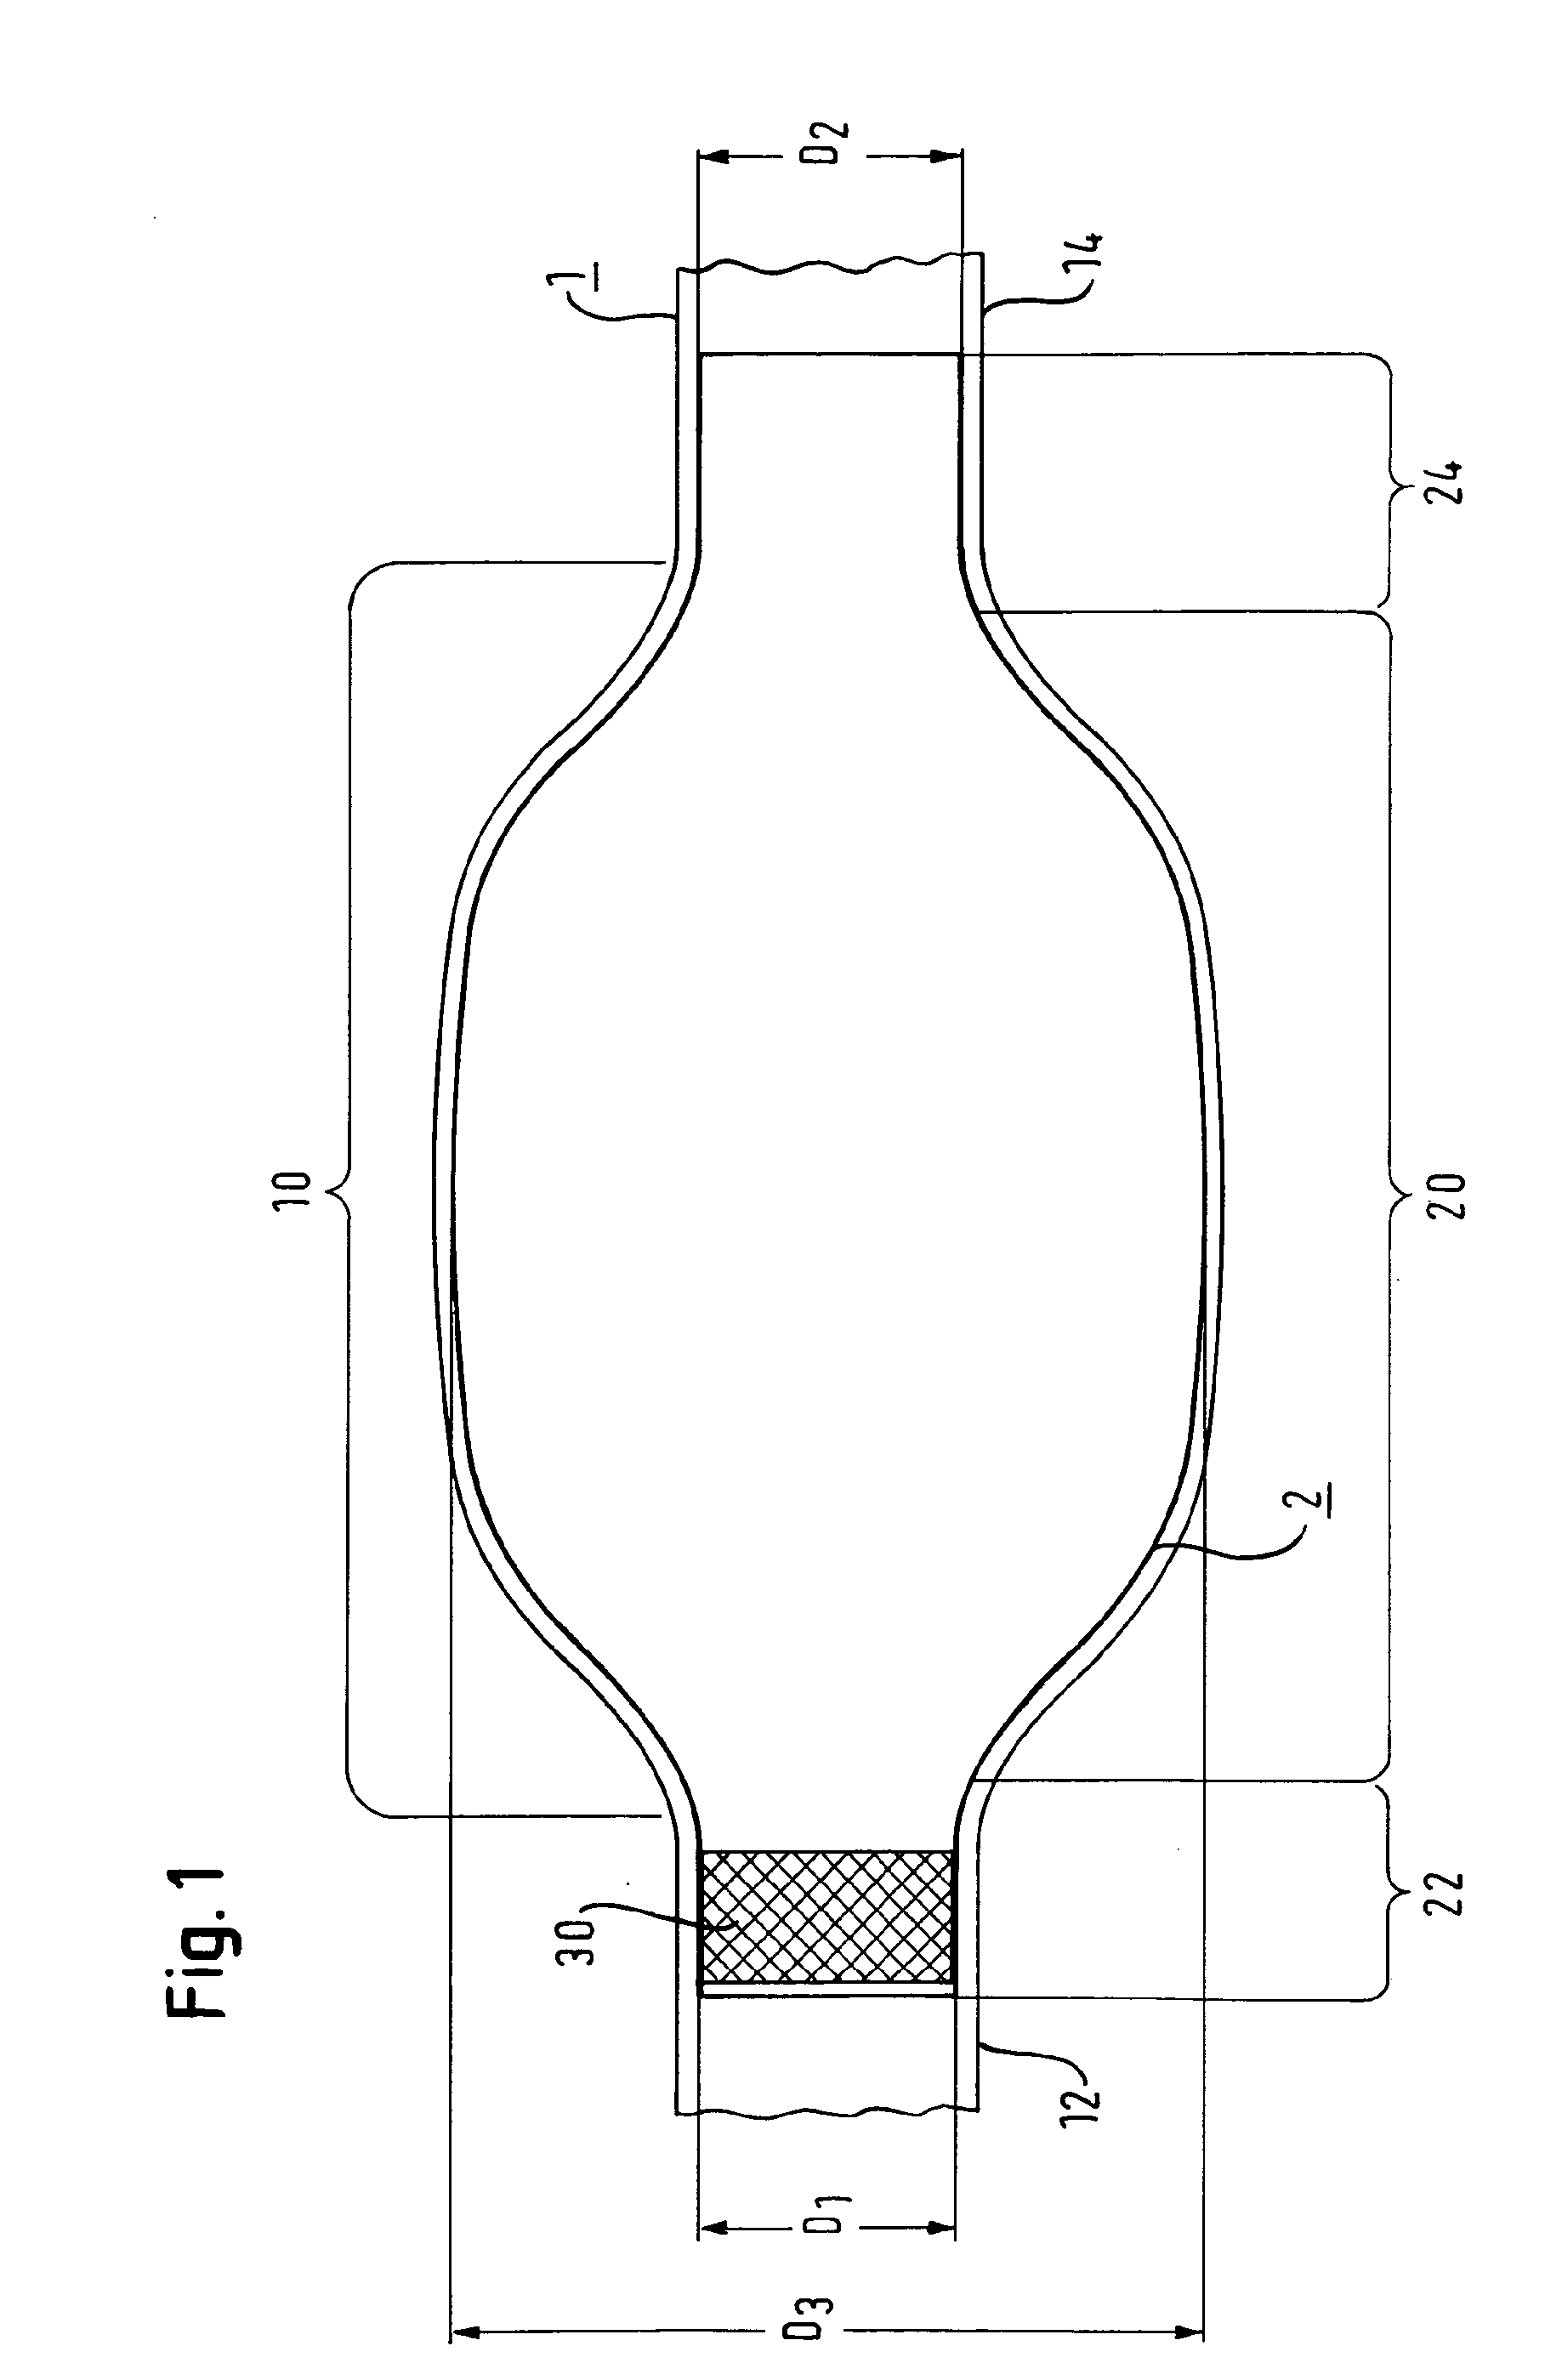 Vascular Prosthesis for Aneurysms, Set of Vascular Prostheses, Method for Manufacturing a Vascular Prosthesis and Method for Inserting a Vascular Prosthesis